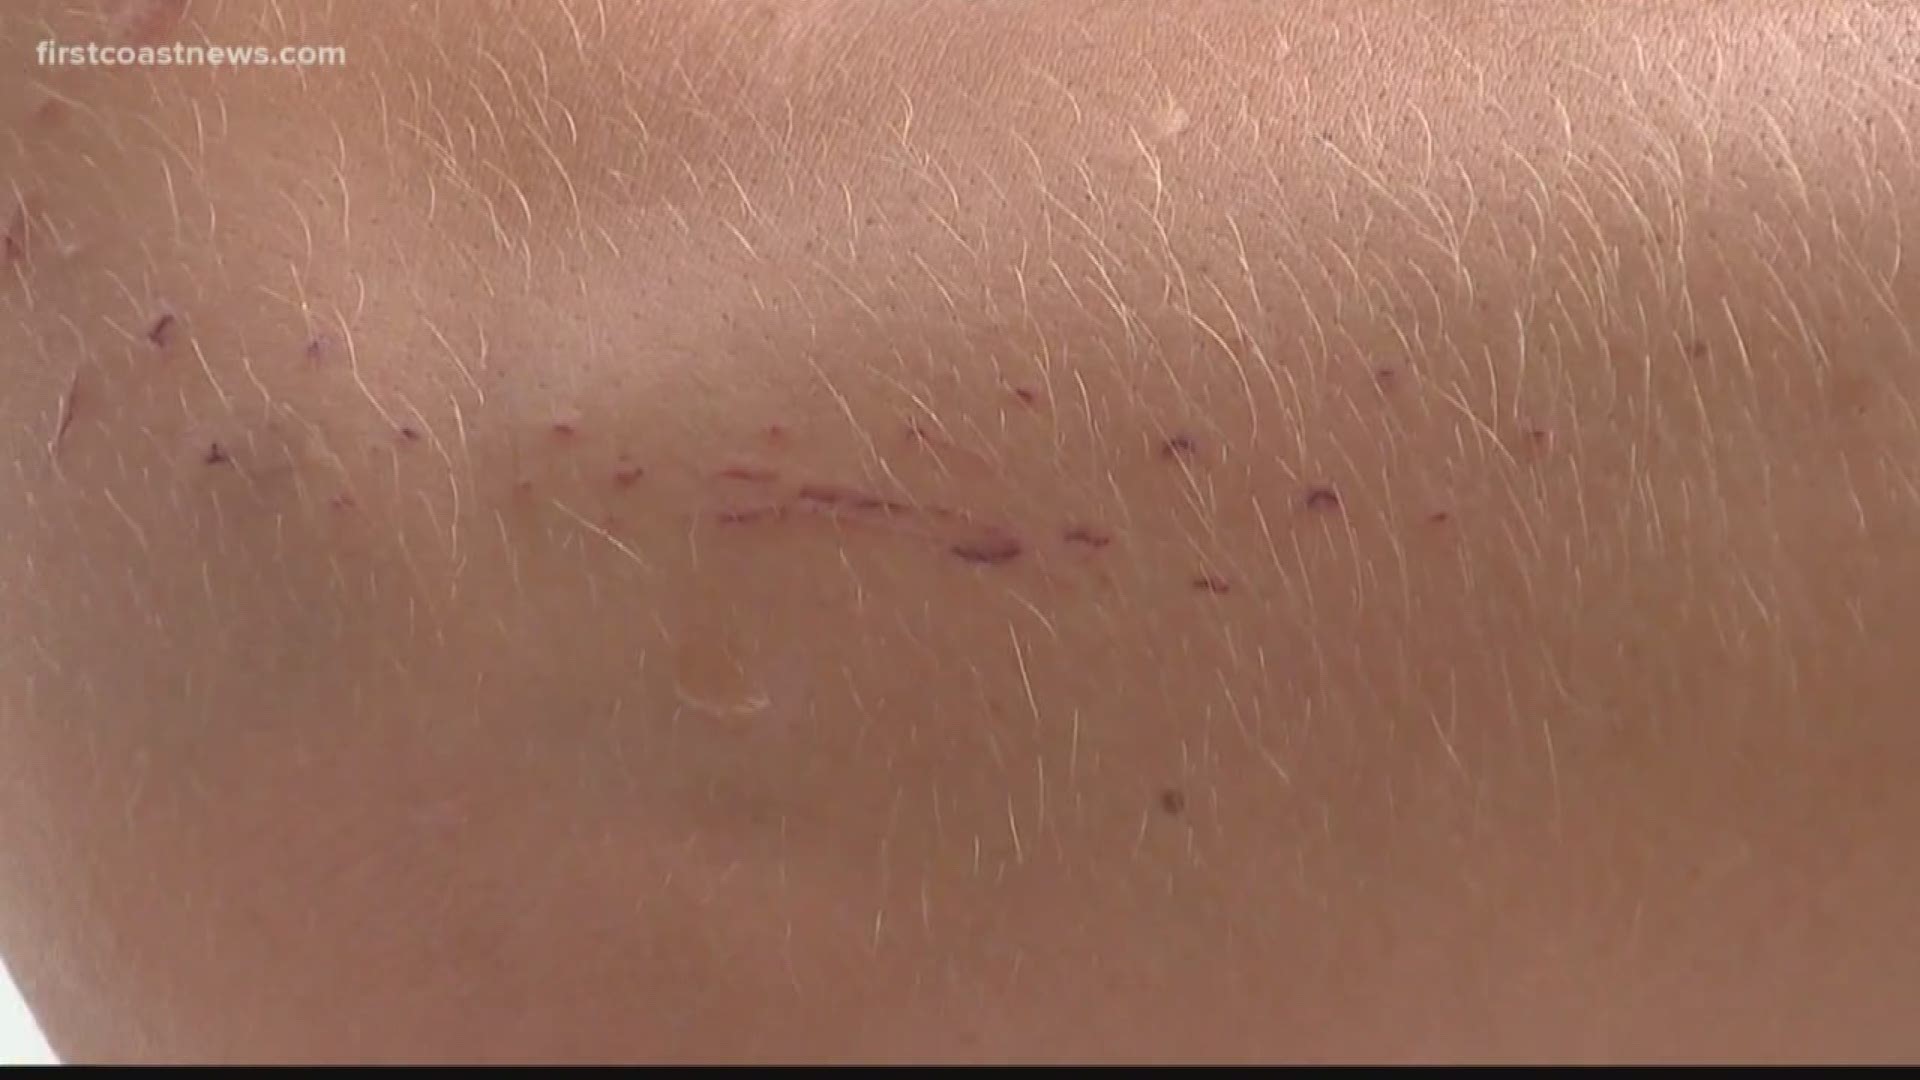 A professional surfer says he's lucky to still have his arm after he was bitten by a shark near the Jacksonville Beach Pier on Saturday.